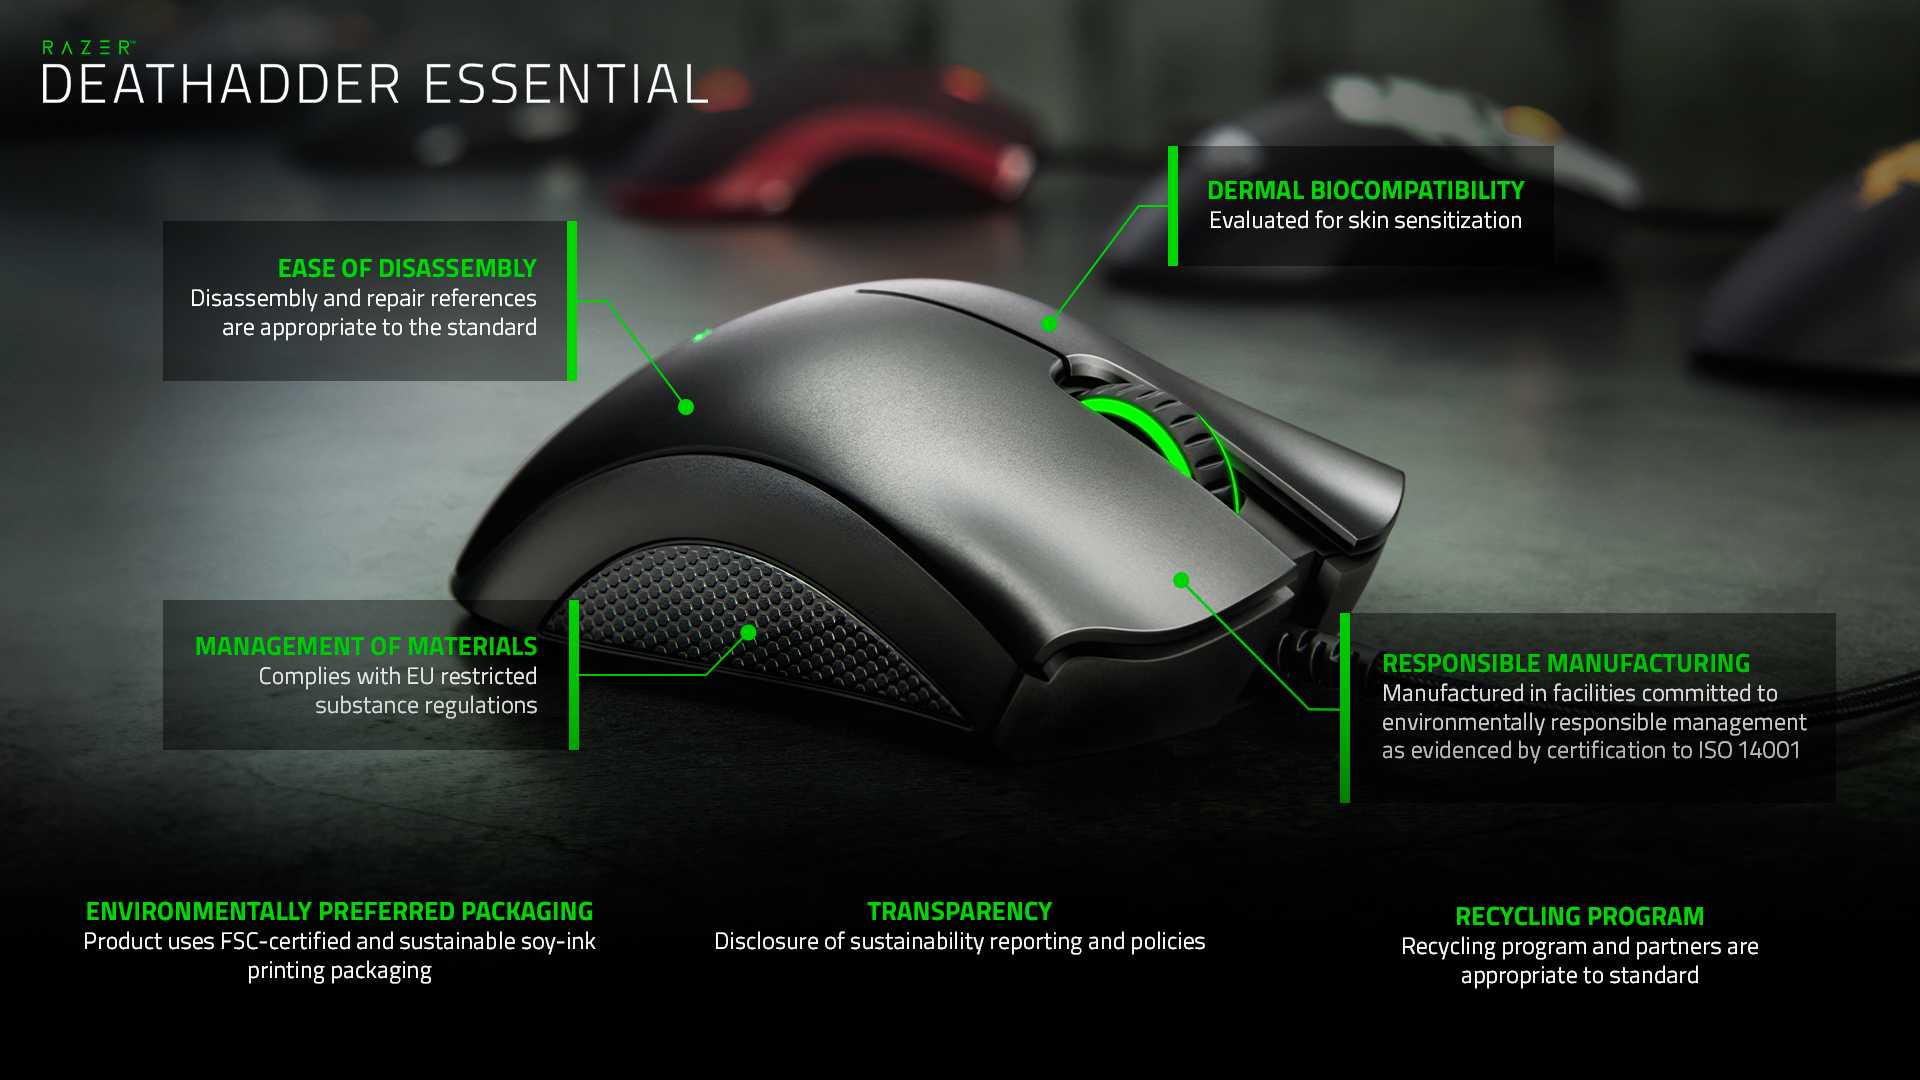 Razer Announces World's First Ecologo-Certified Gaming Mice